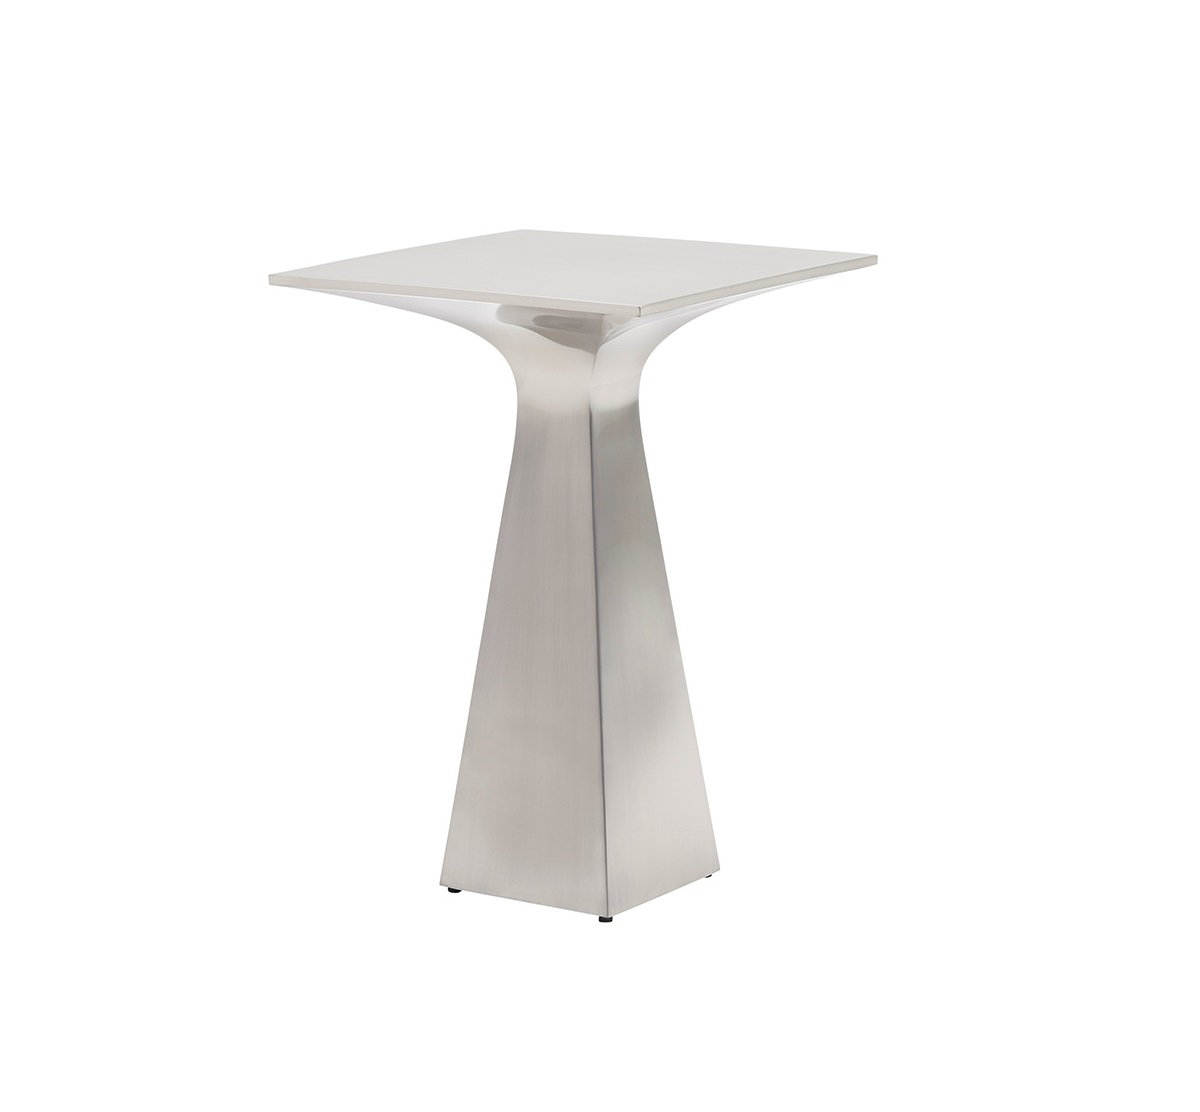 Kitano Sato Stainless Accent Table, Lexington Accent Table For Sale